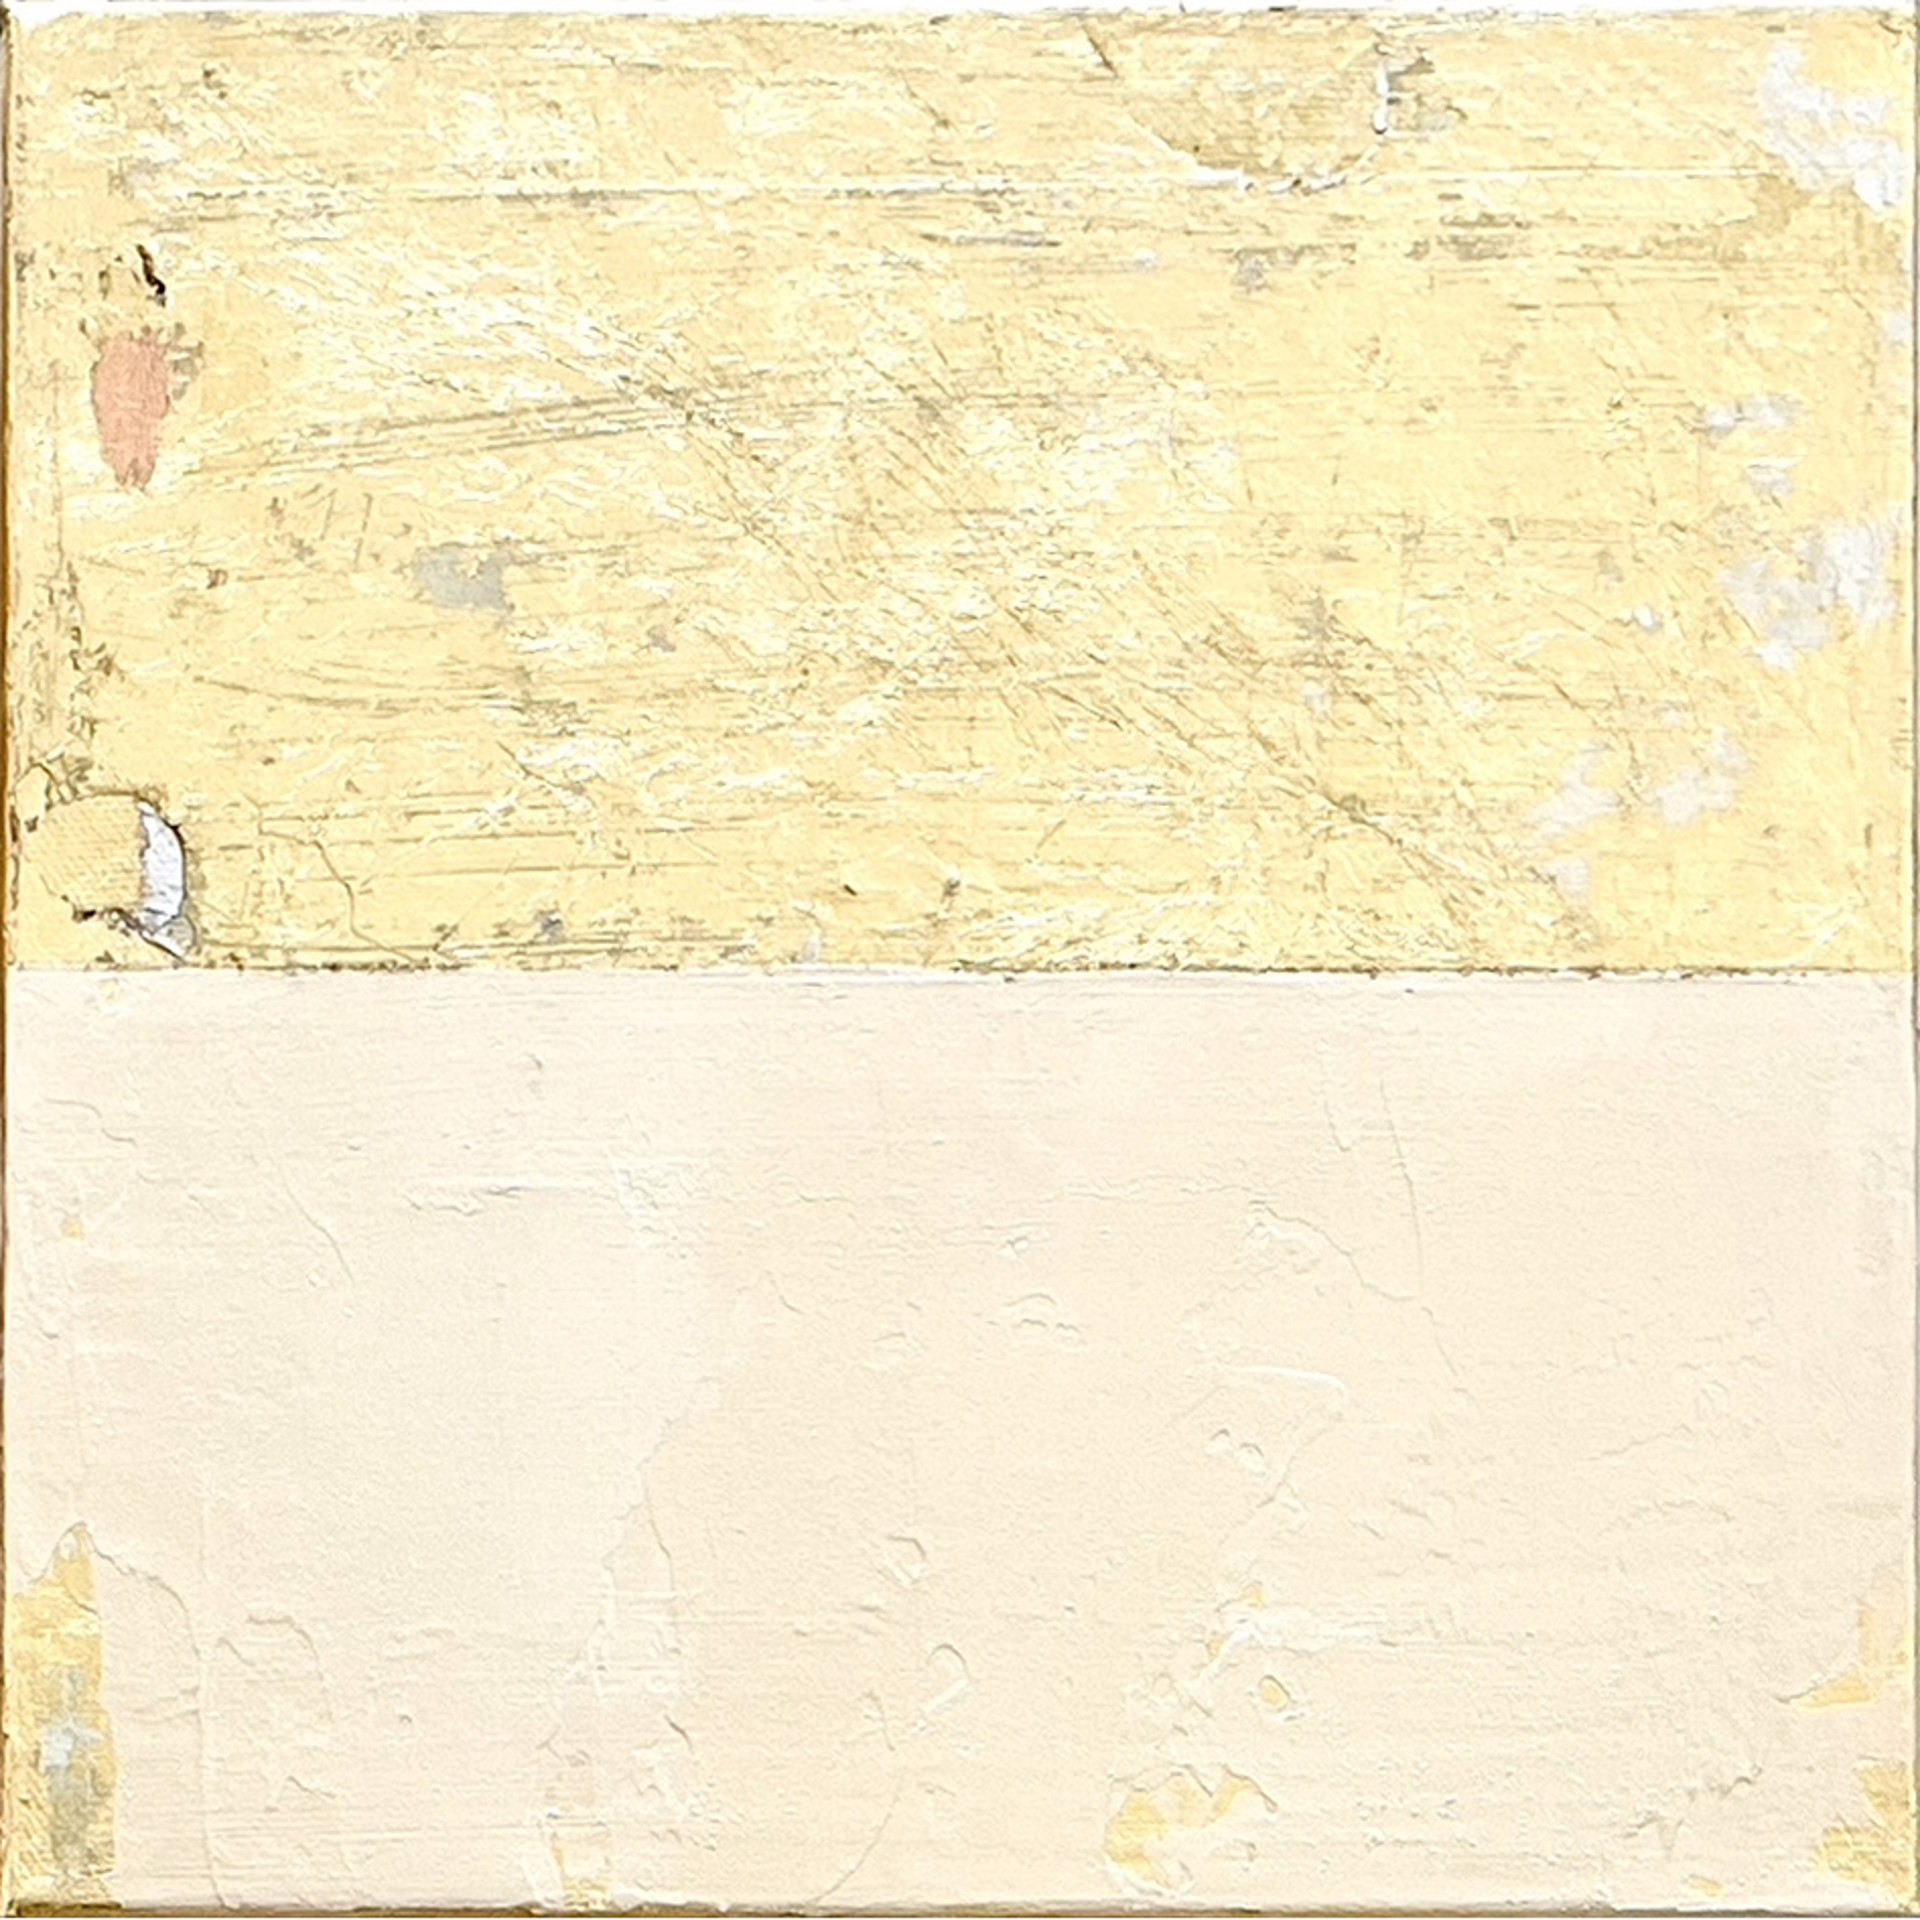 Gold And Gold (GG051) is 1 of 4 gold leaf mixed media panels from Japanese painter and artist Takefumi Hori.